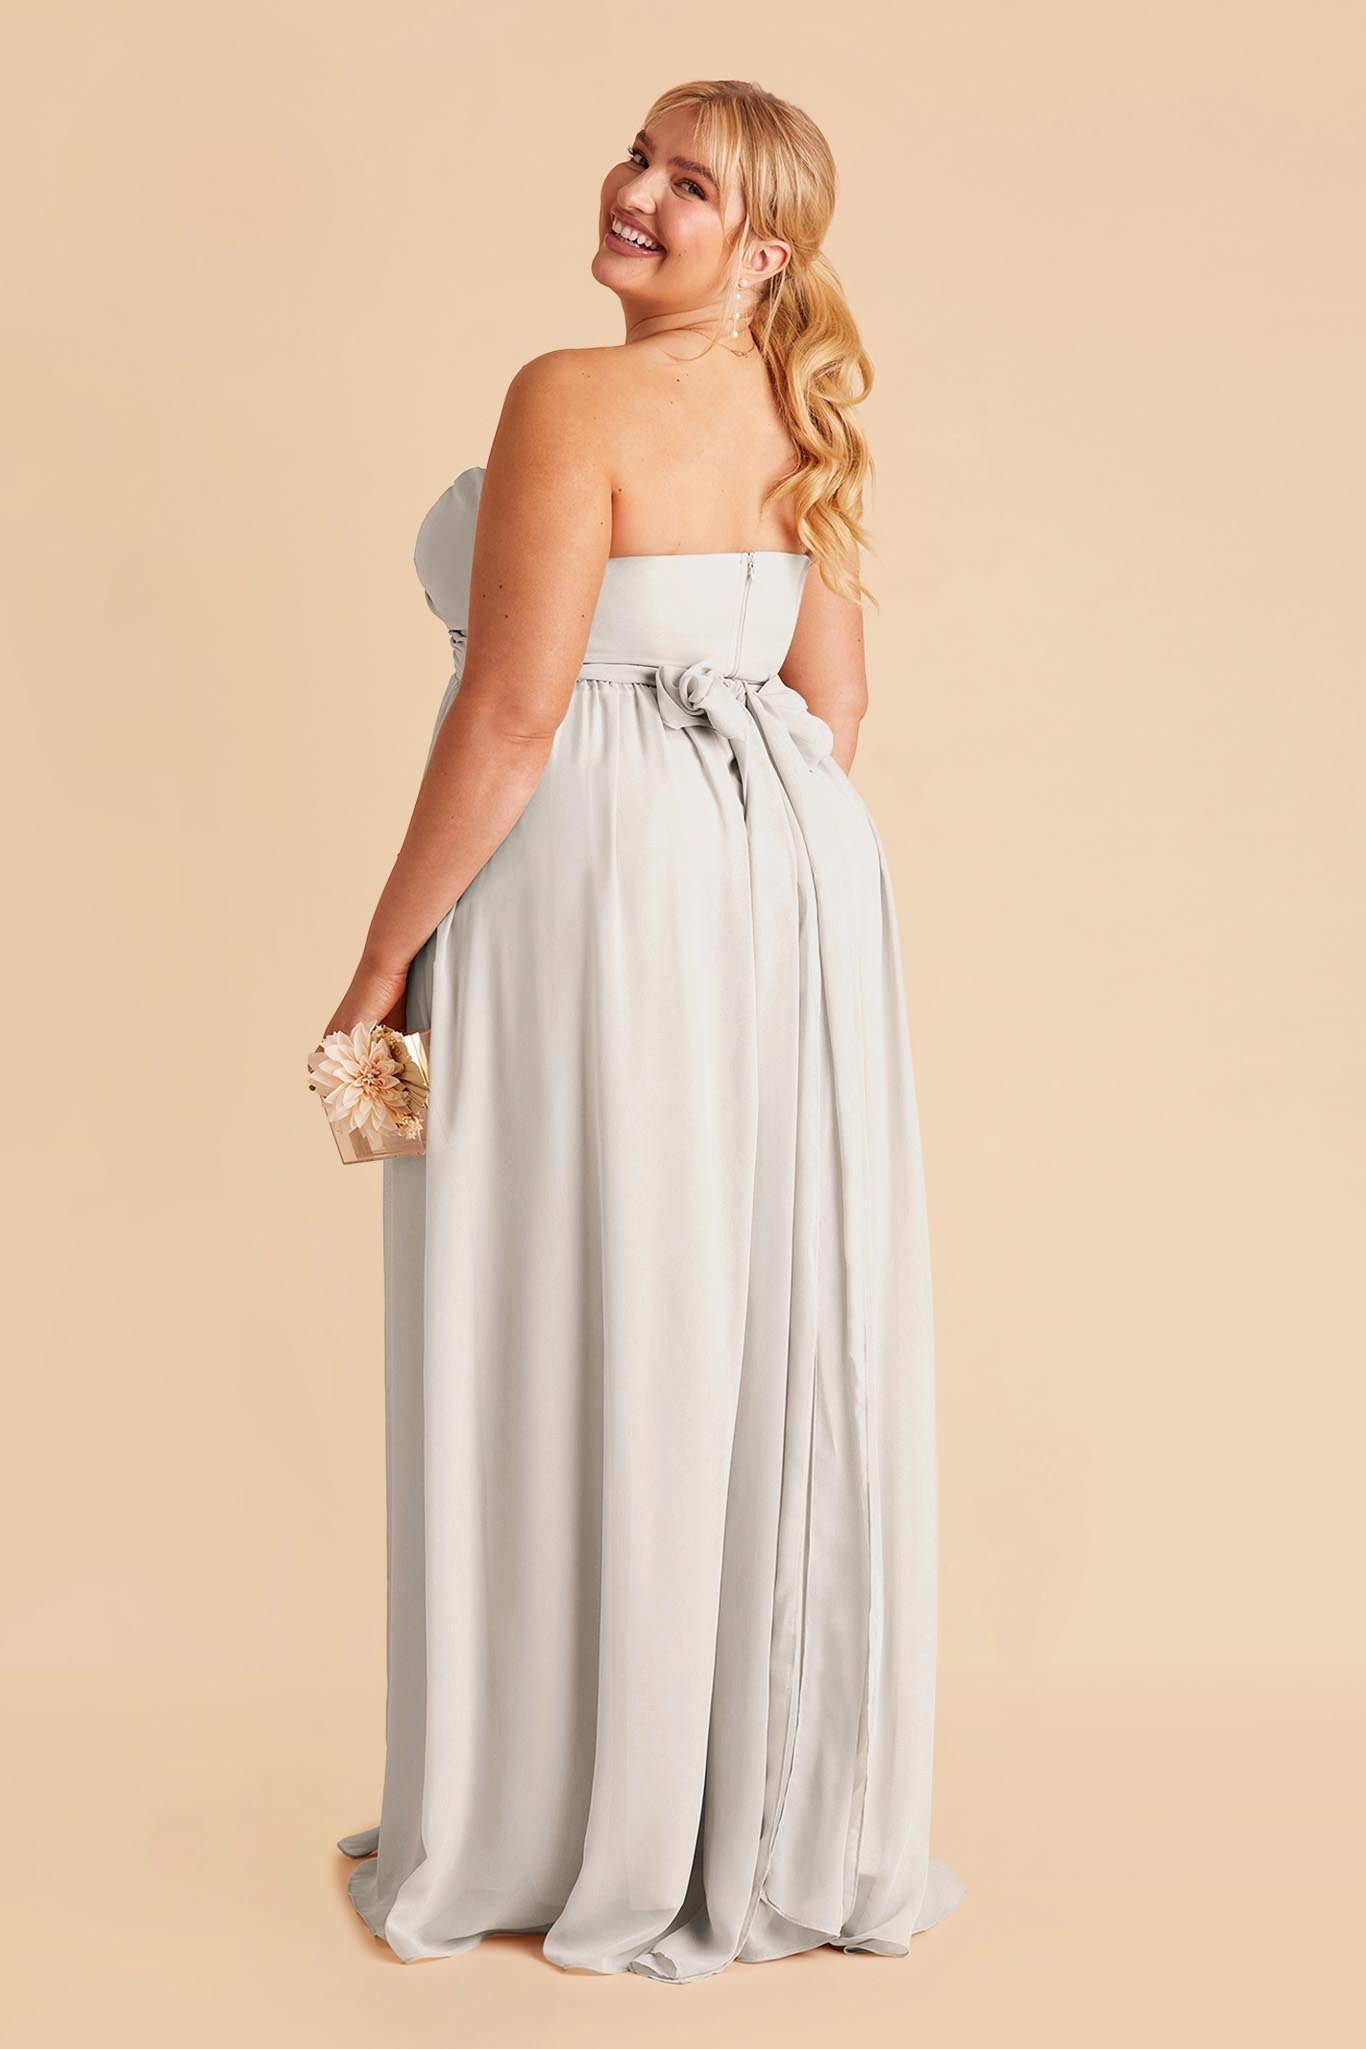 Dove Gray Grace Convertible Dress by Birdy Grey